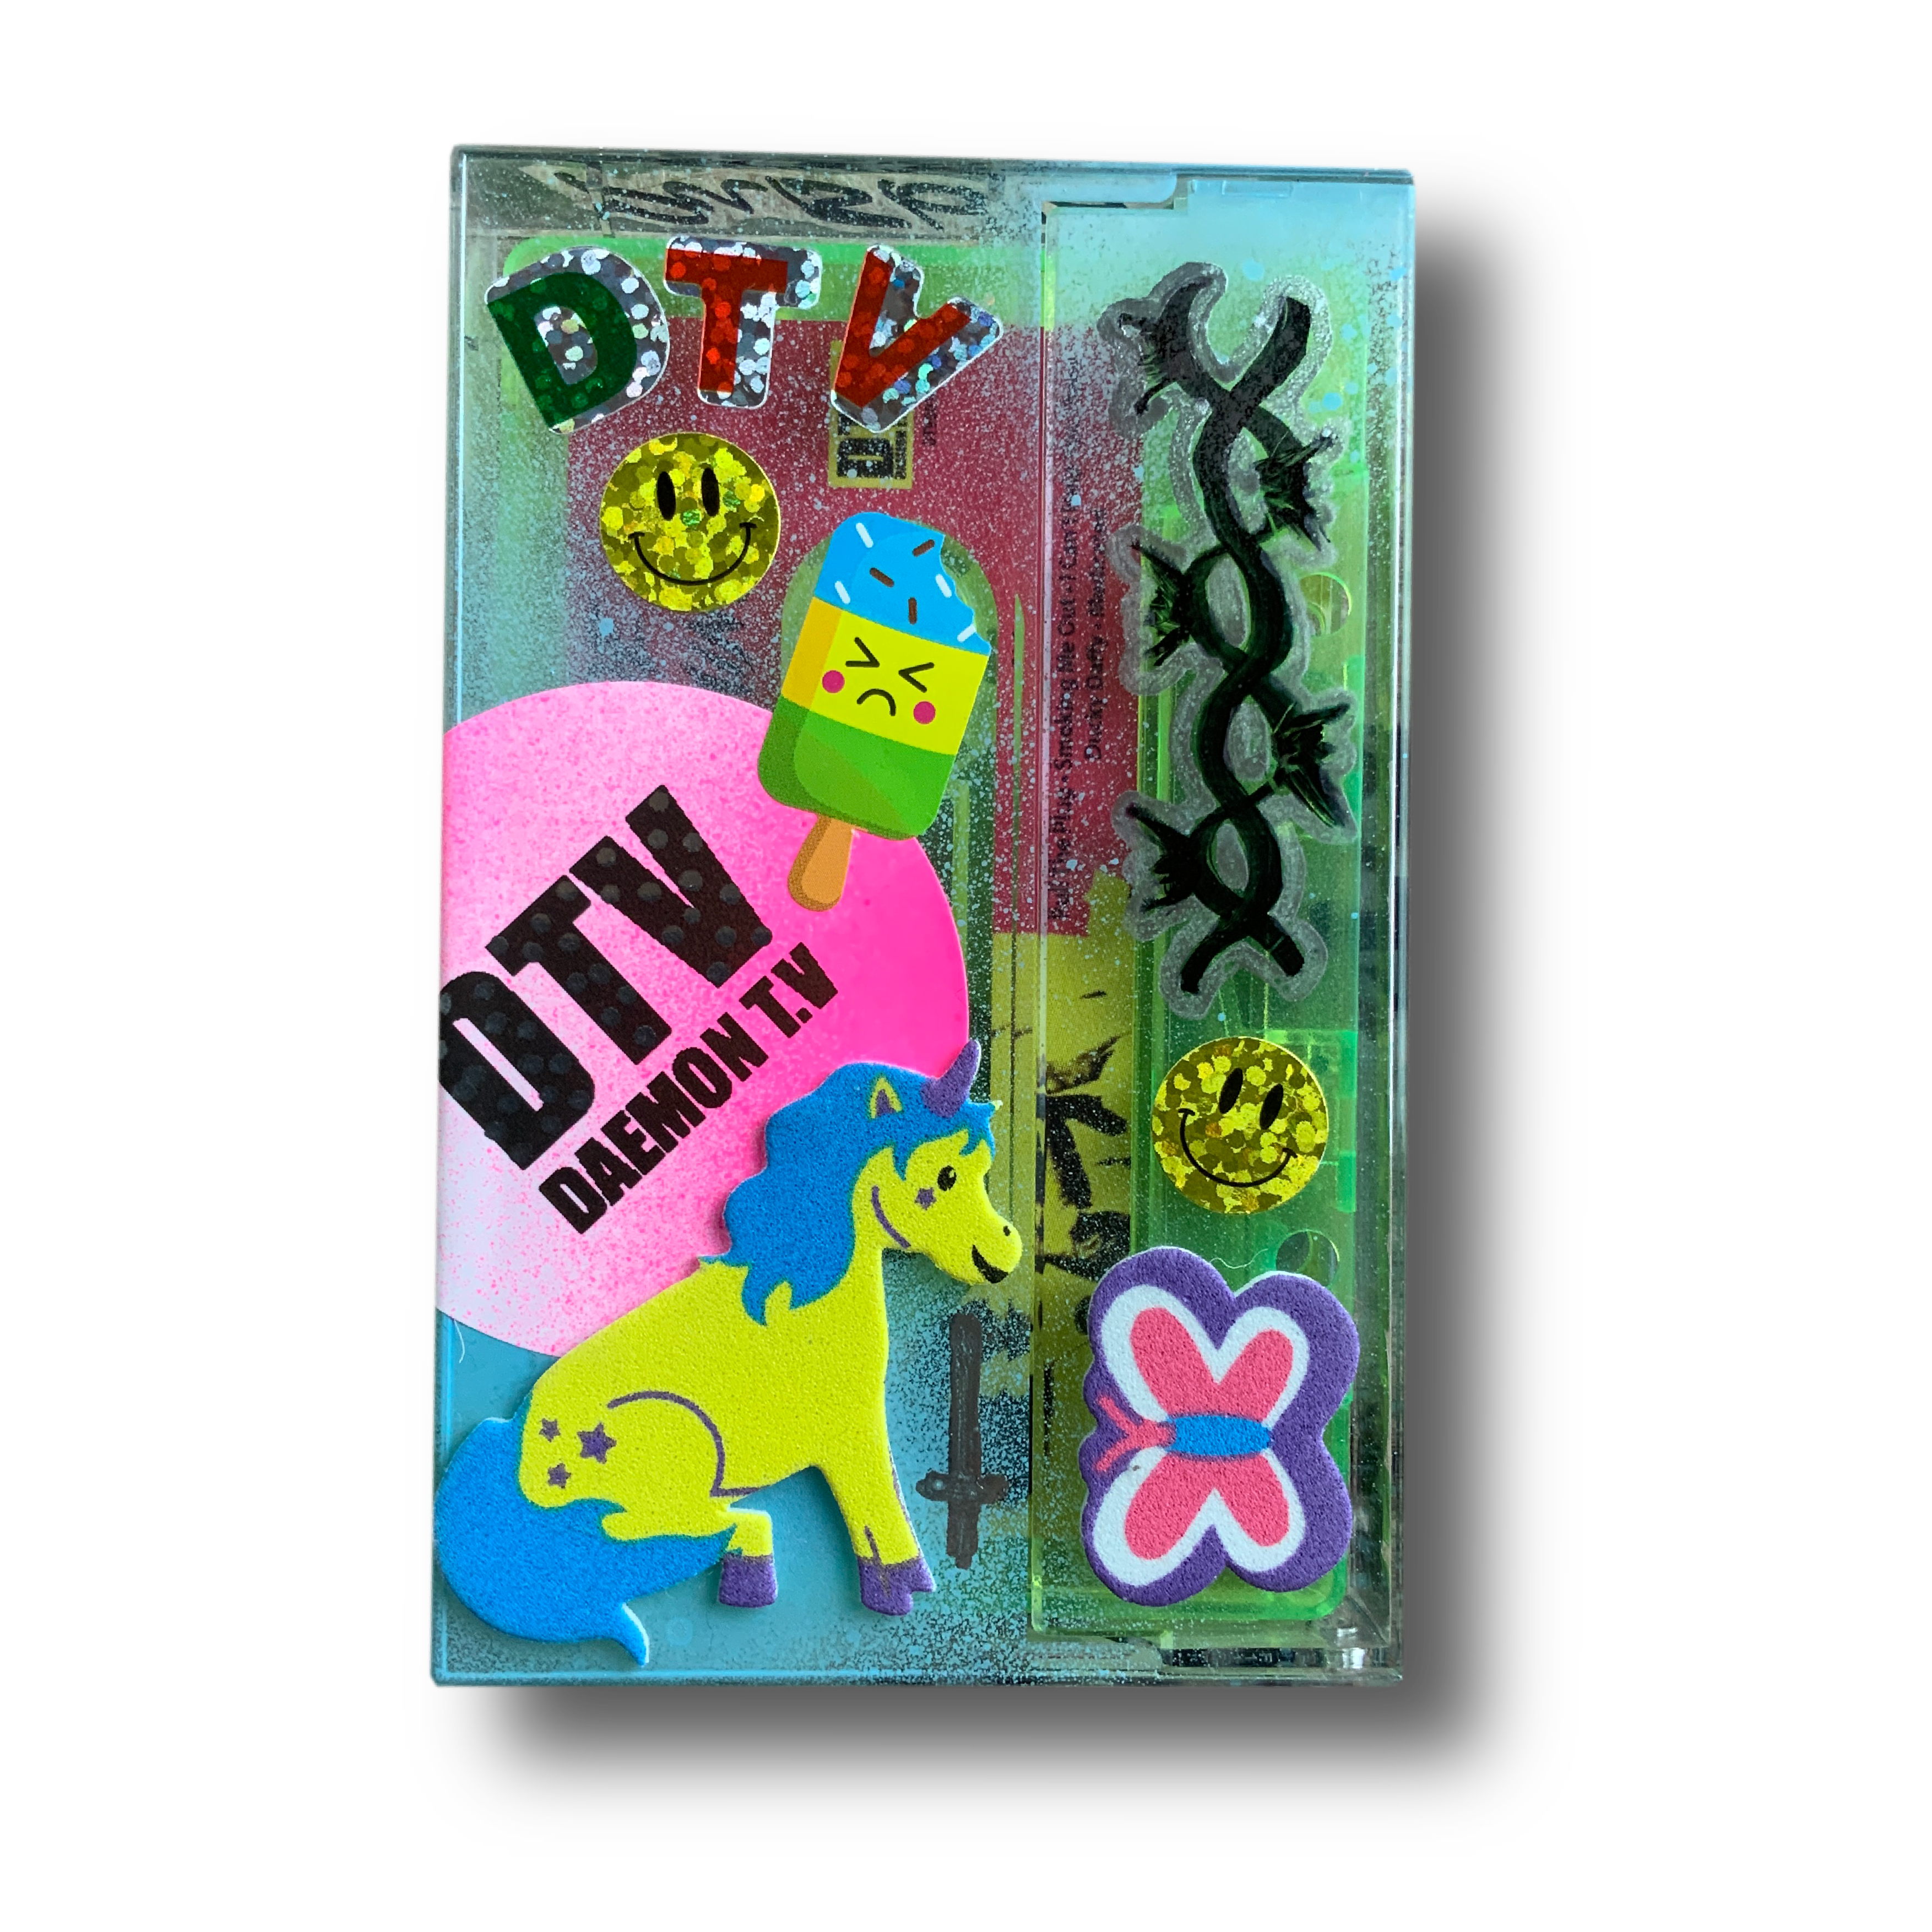 Hand decorated cassette tape with stickers and drawings